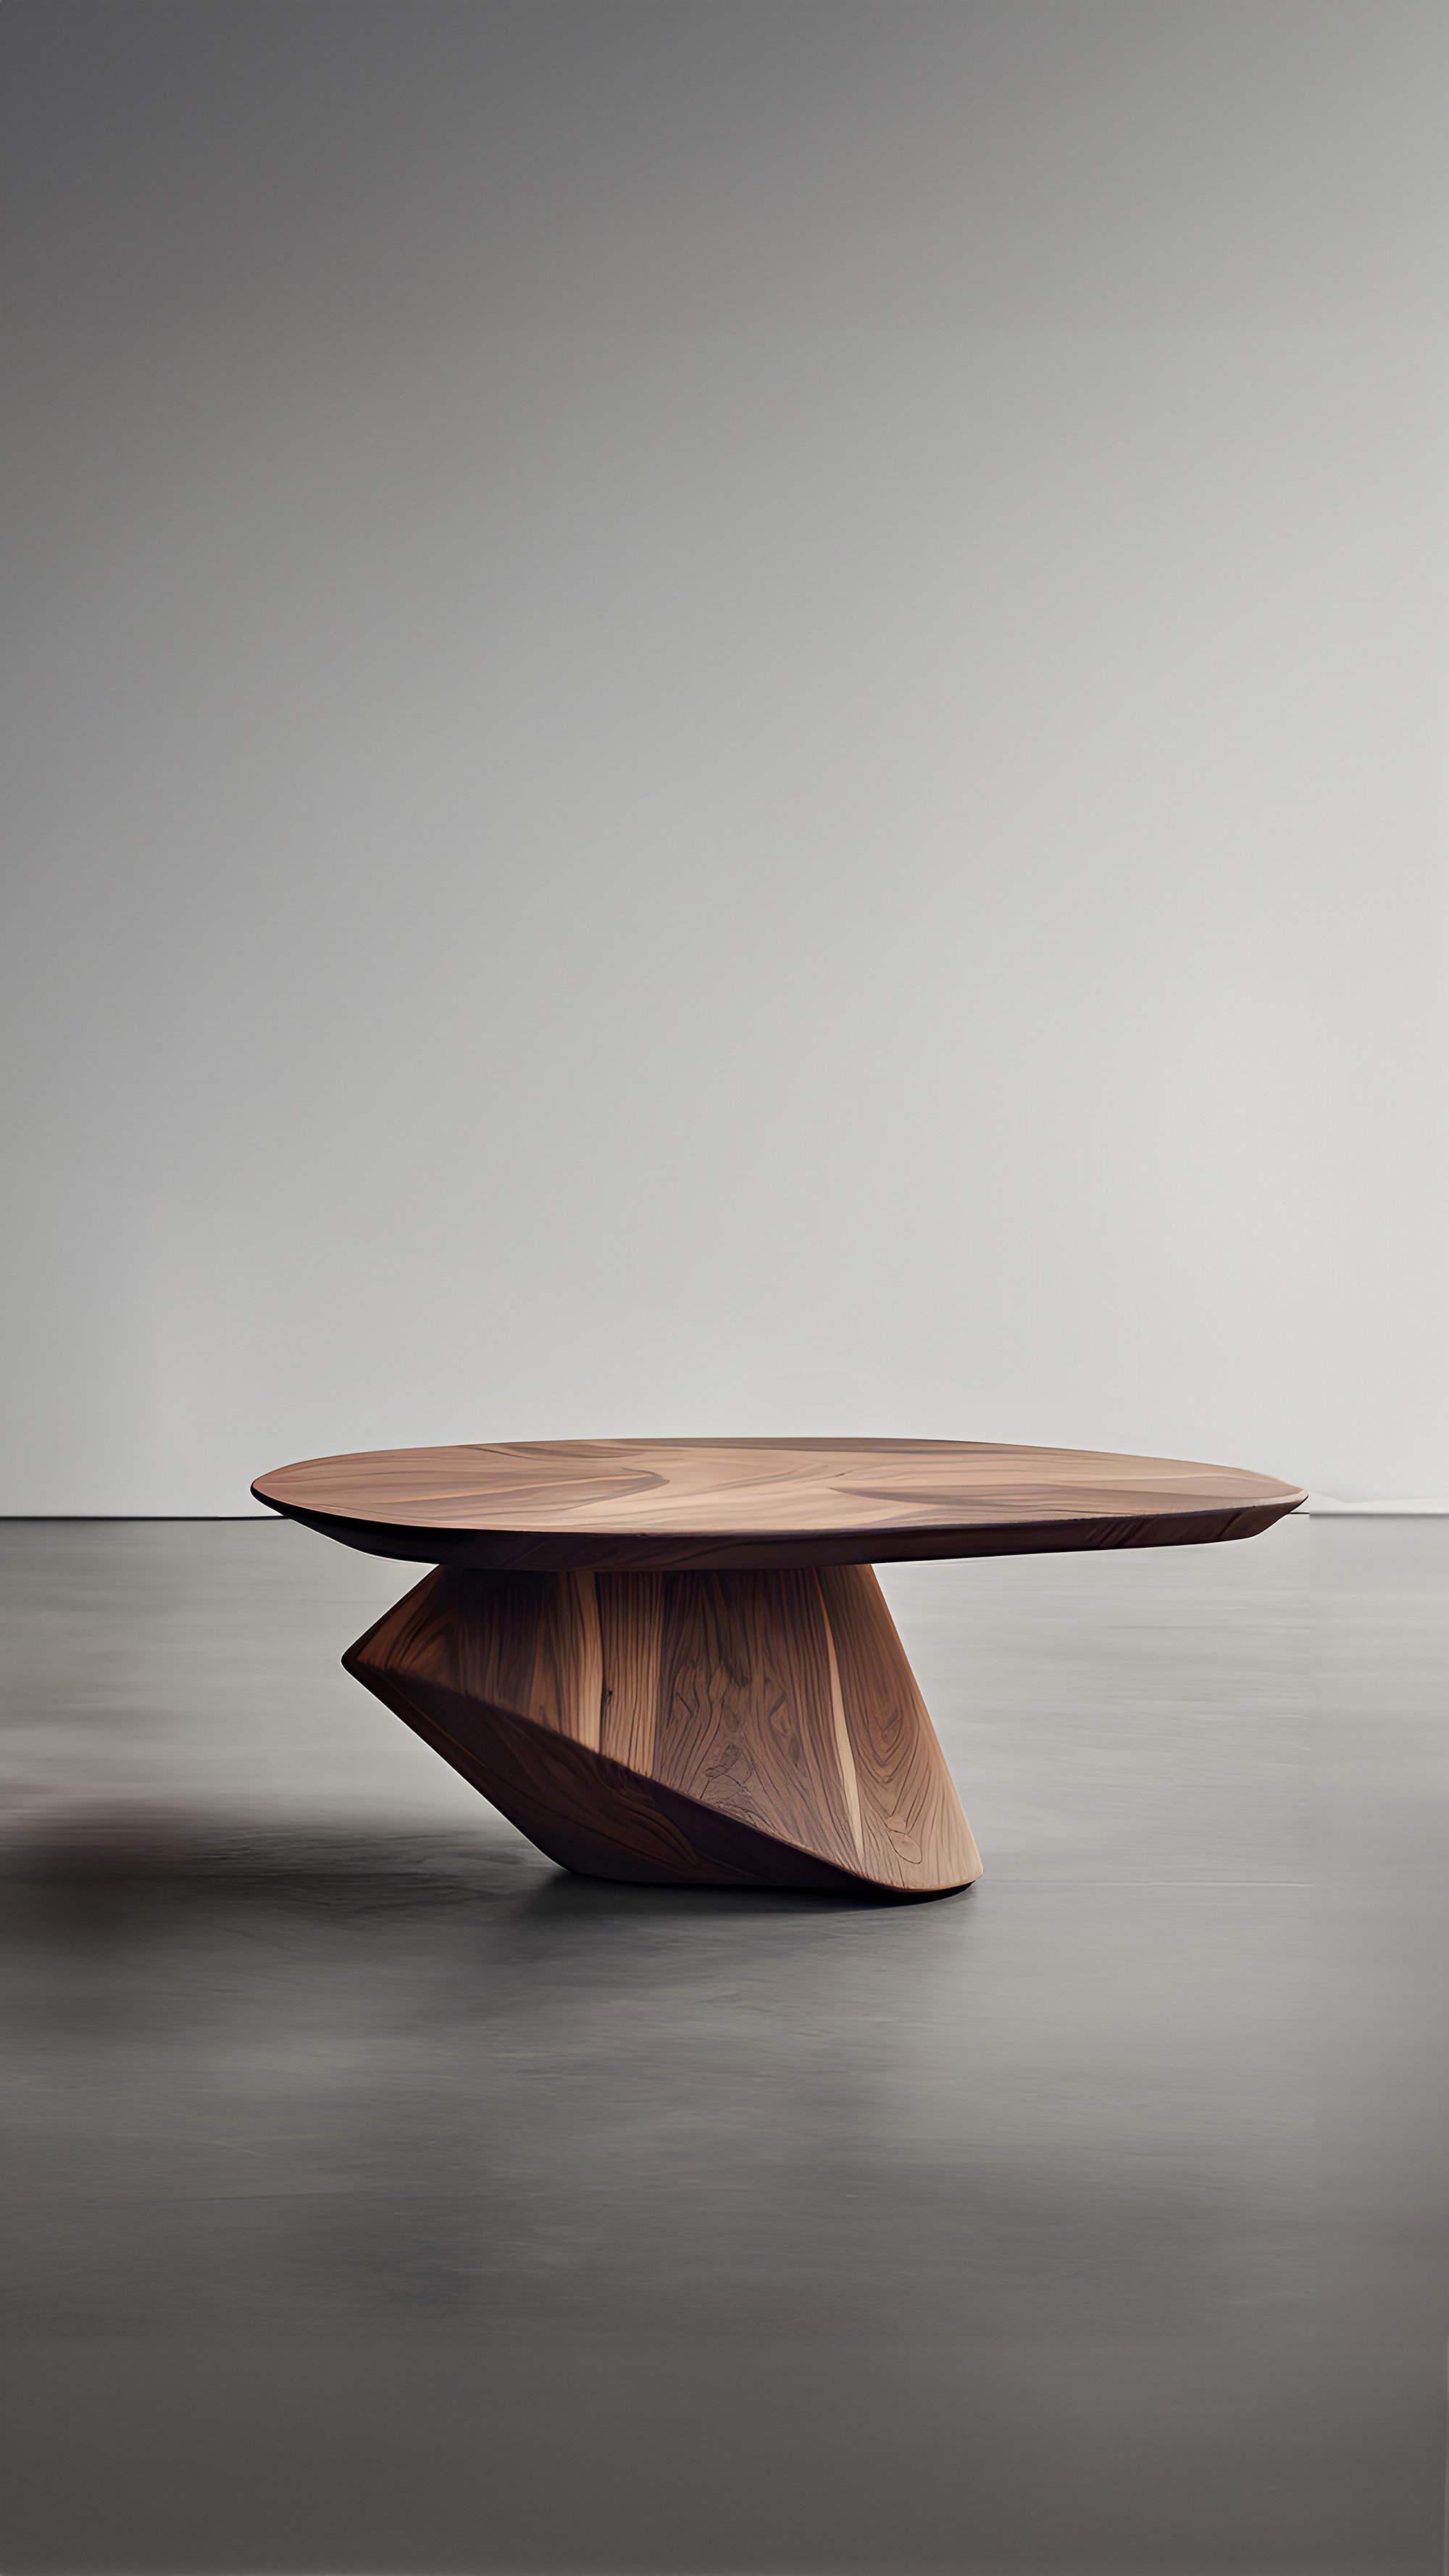 Sculptural Coffee Table Made of Solid Wood, Center Table Solace S36 by Joel Escalona — 8.jpg